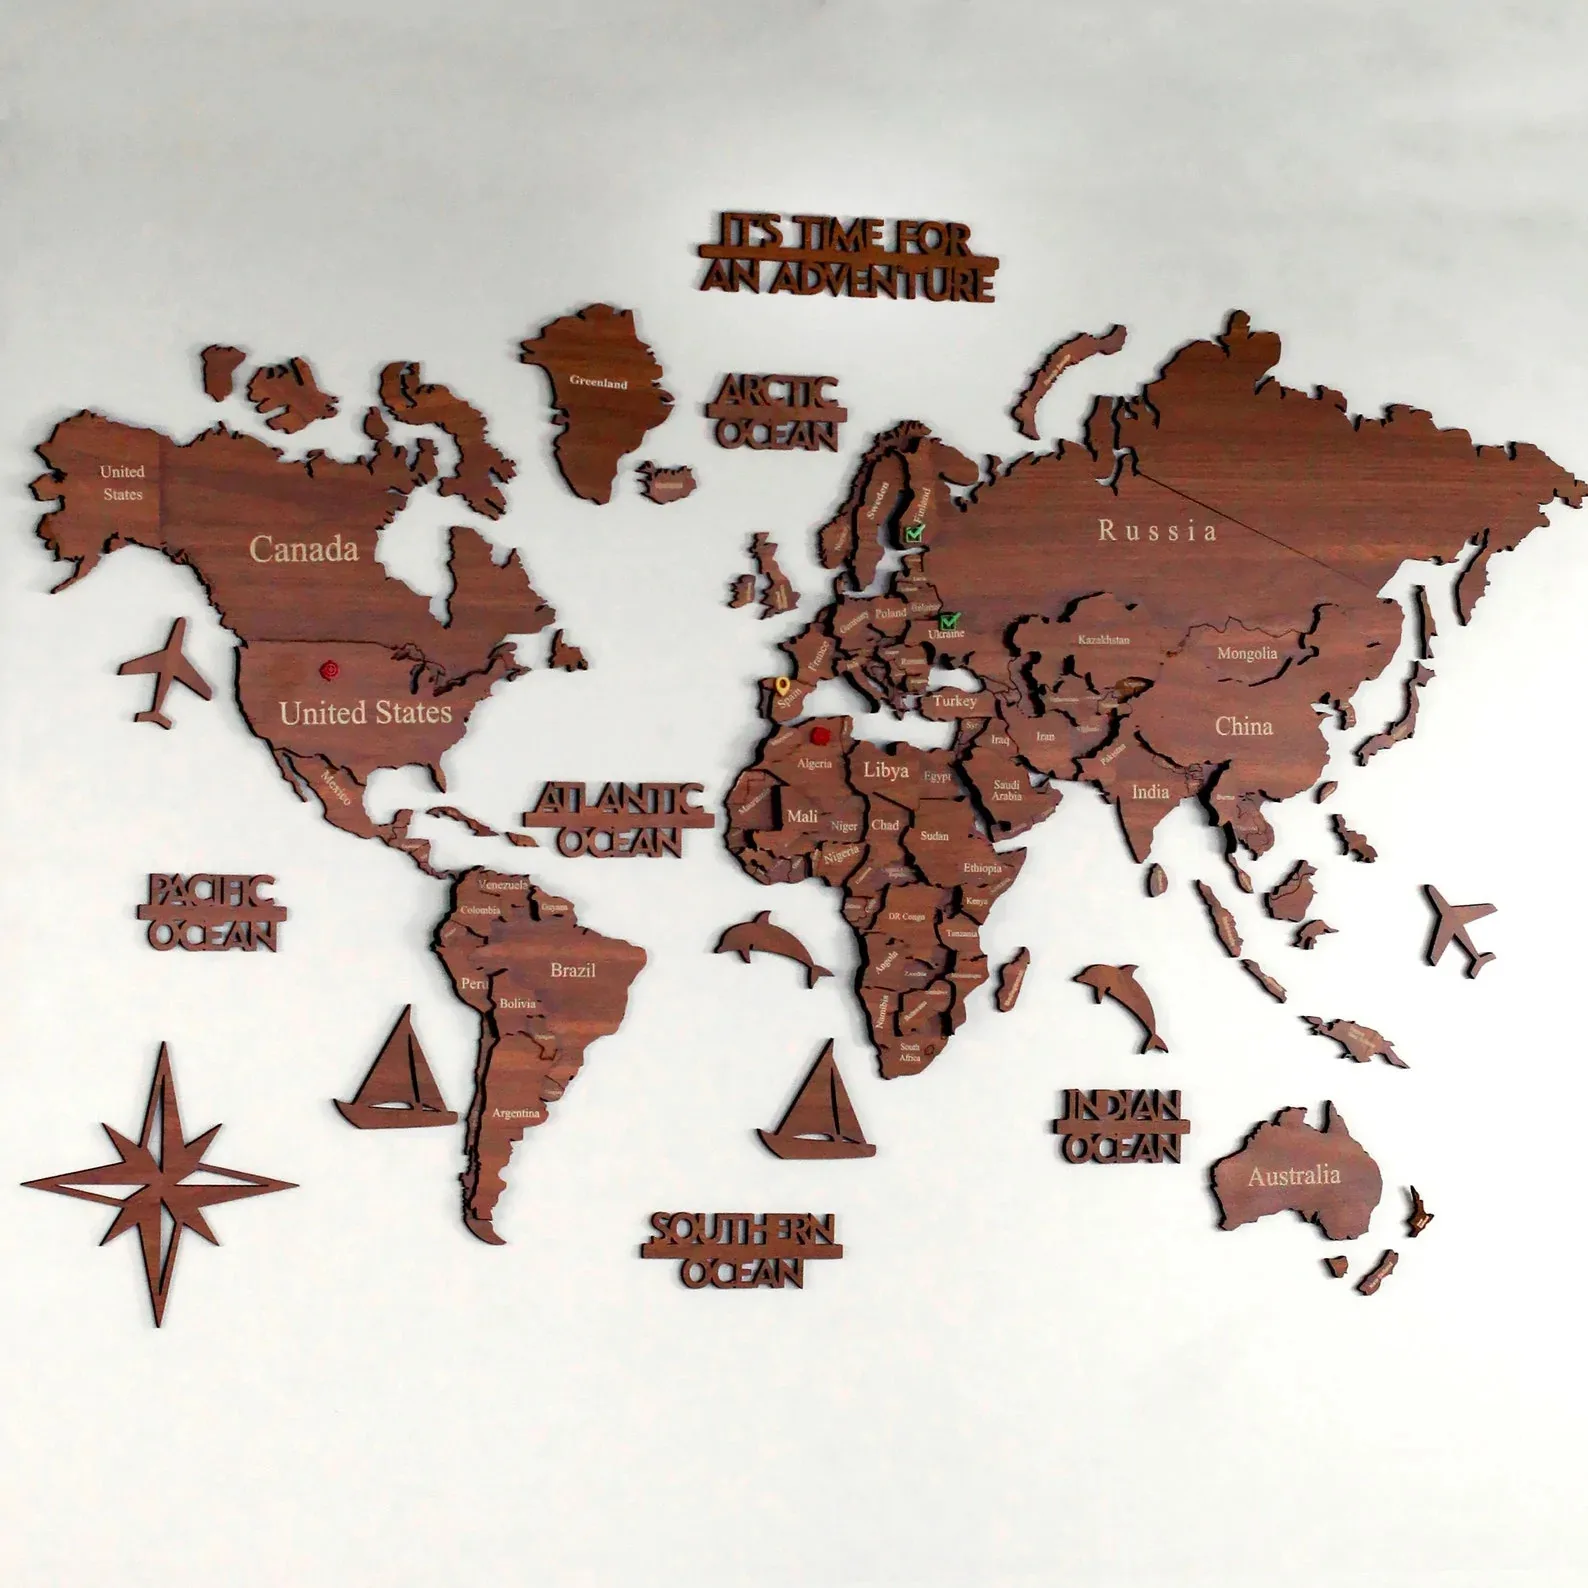 Large Size 3 Dimensions Wooden World Map 5 Types Modern Art Wall Decor Painting Travel Map Home Office School Living Room images - 6